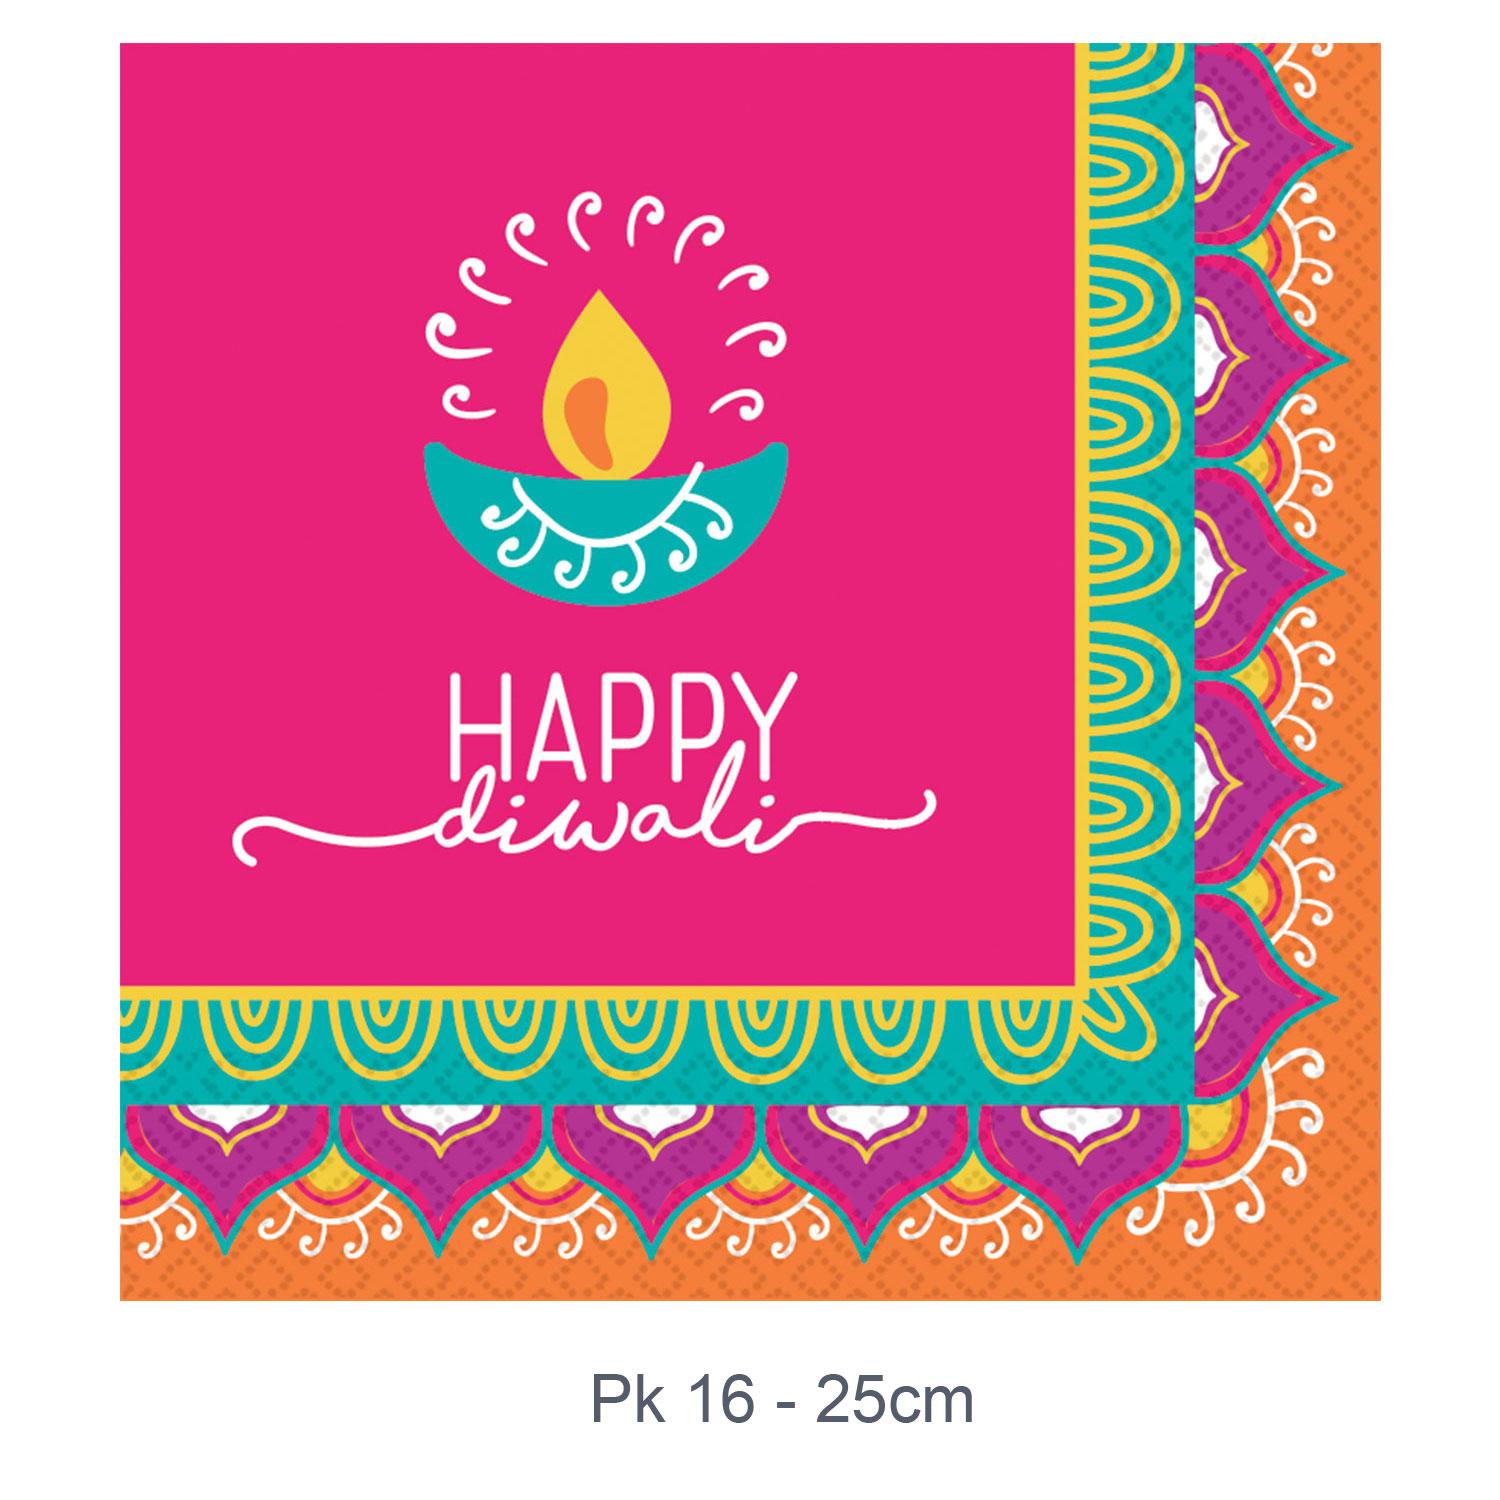 Diwali Celebrations Beverage Napkins 25cm pk16 3ply by Amscan 502413 available here at Karnival Costumes online party shop